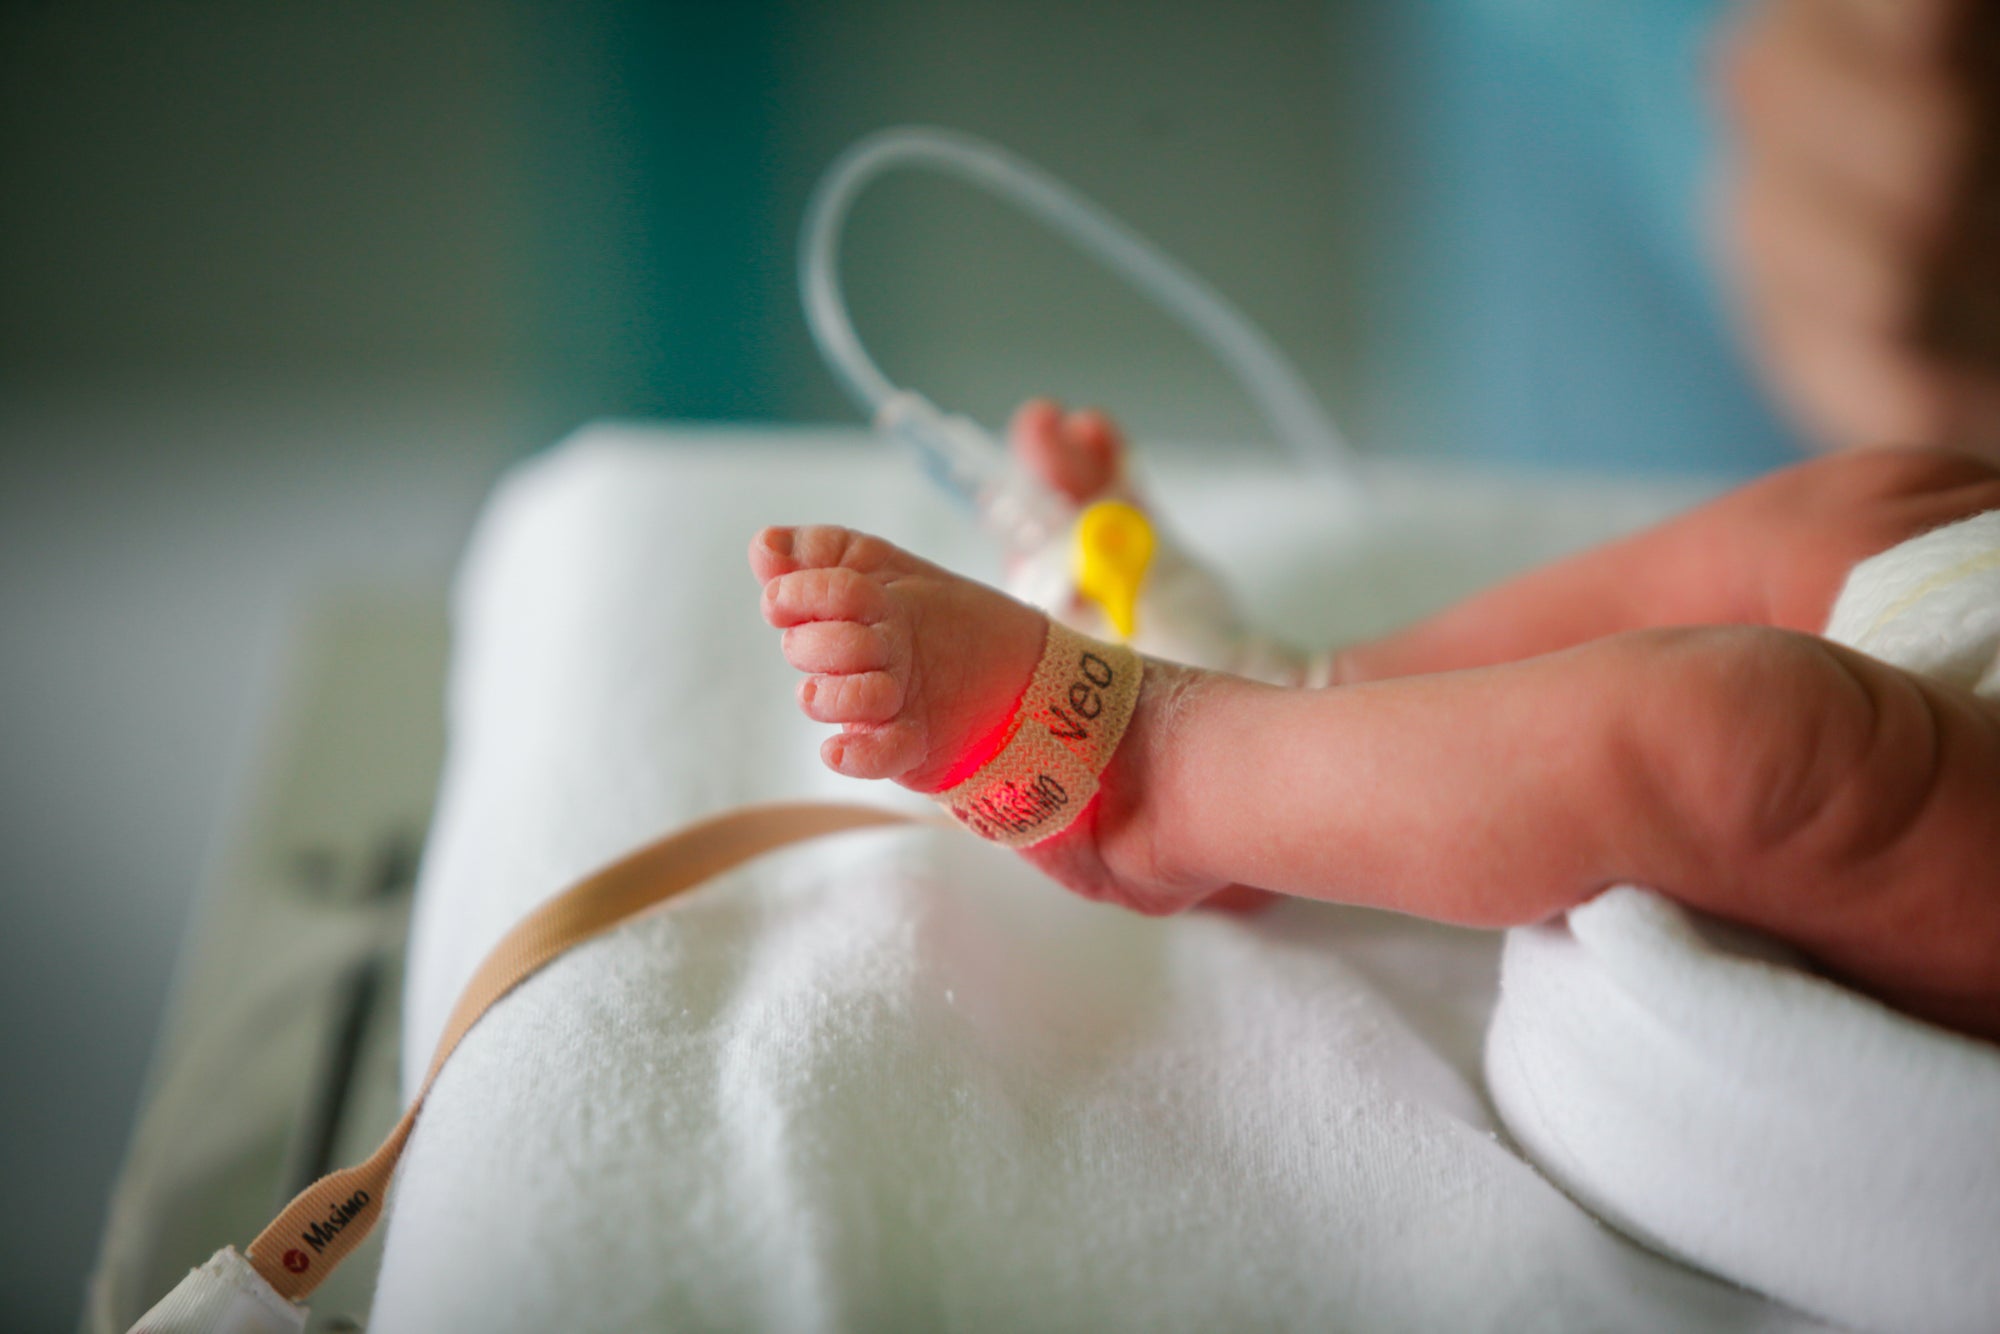 Preterm Labour - What You Need to Know